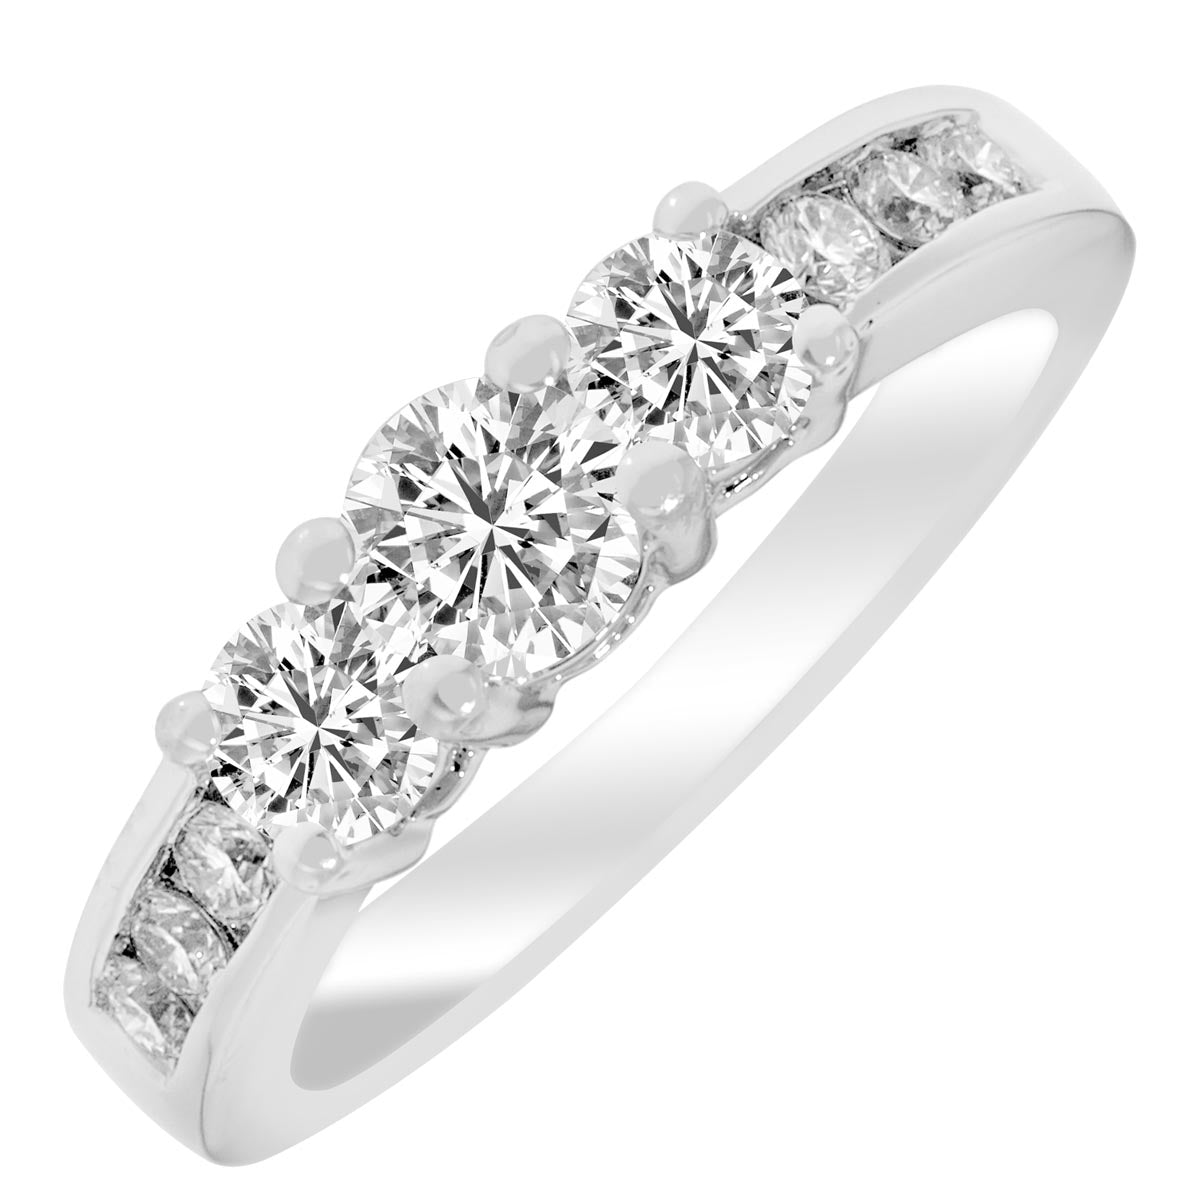 Northern Star Diamond Three Stone Engagement Ring in 14kt White Gold with Channel Set Diamonds (1ct tw)